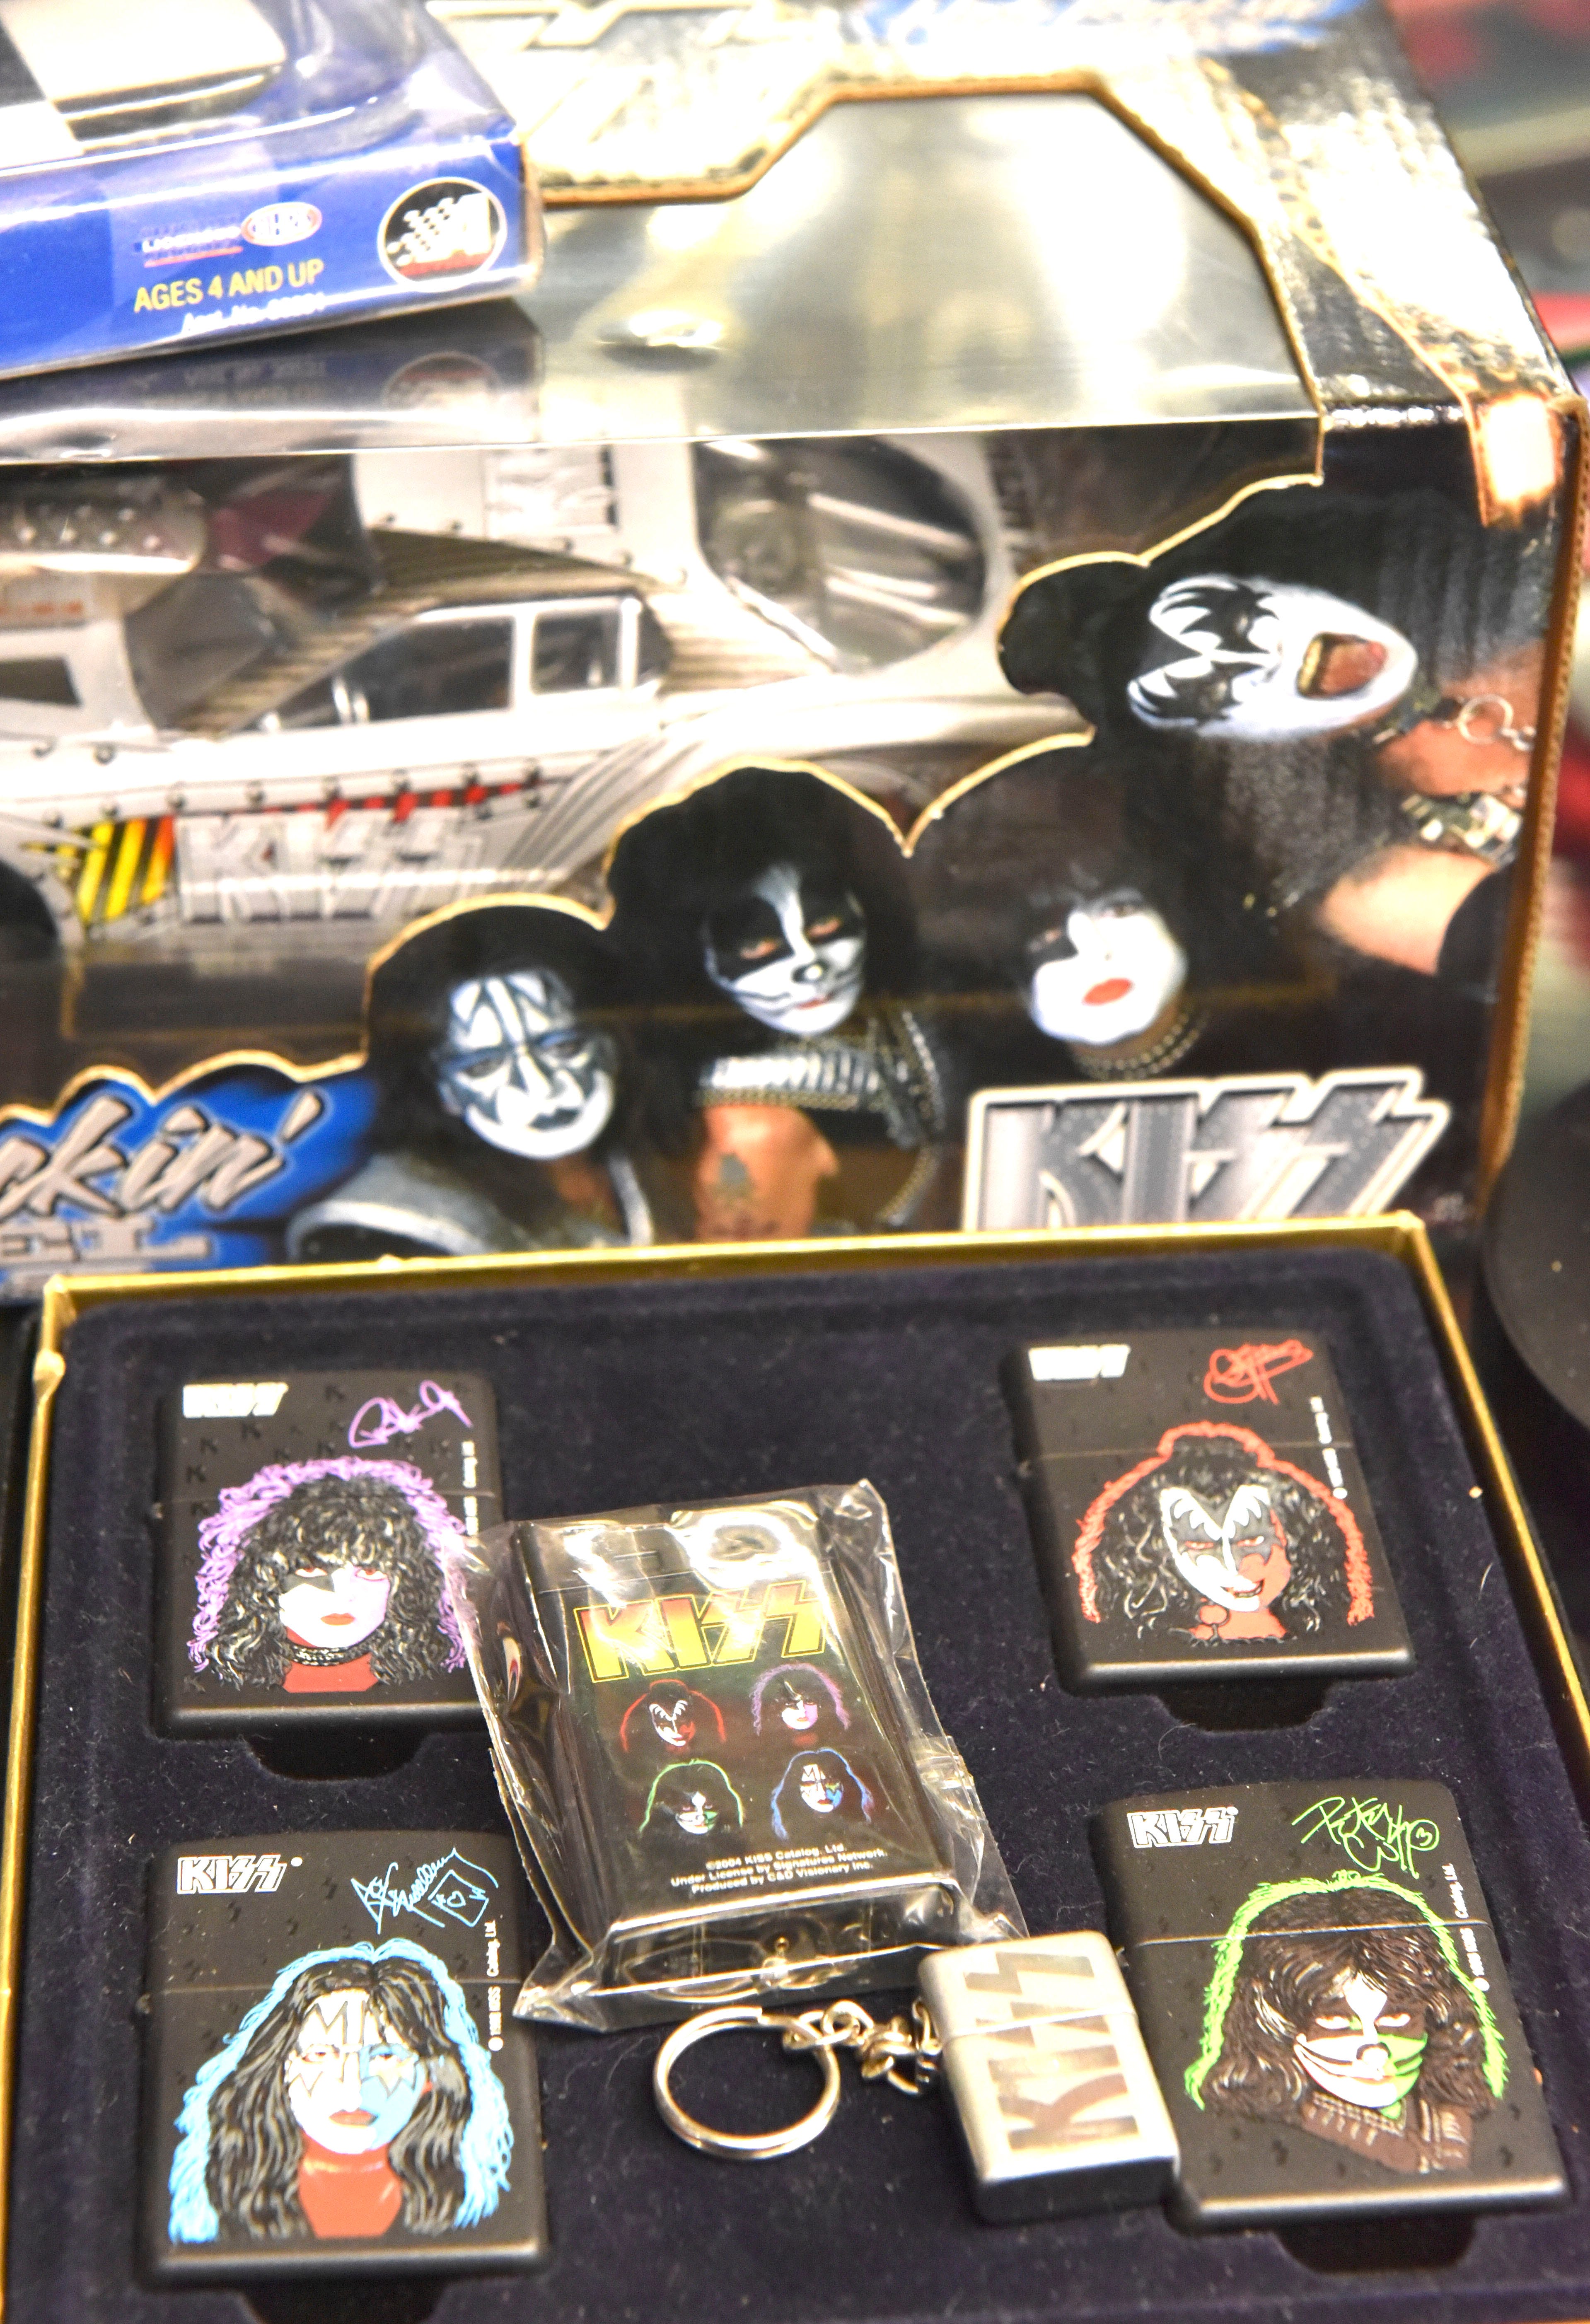 These are KISS lighters.